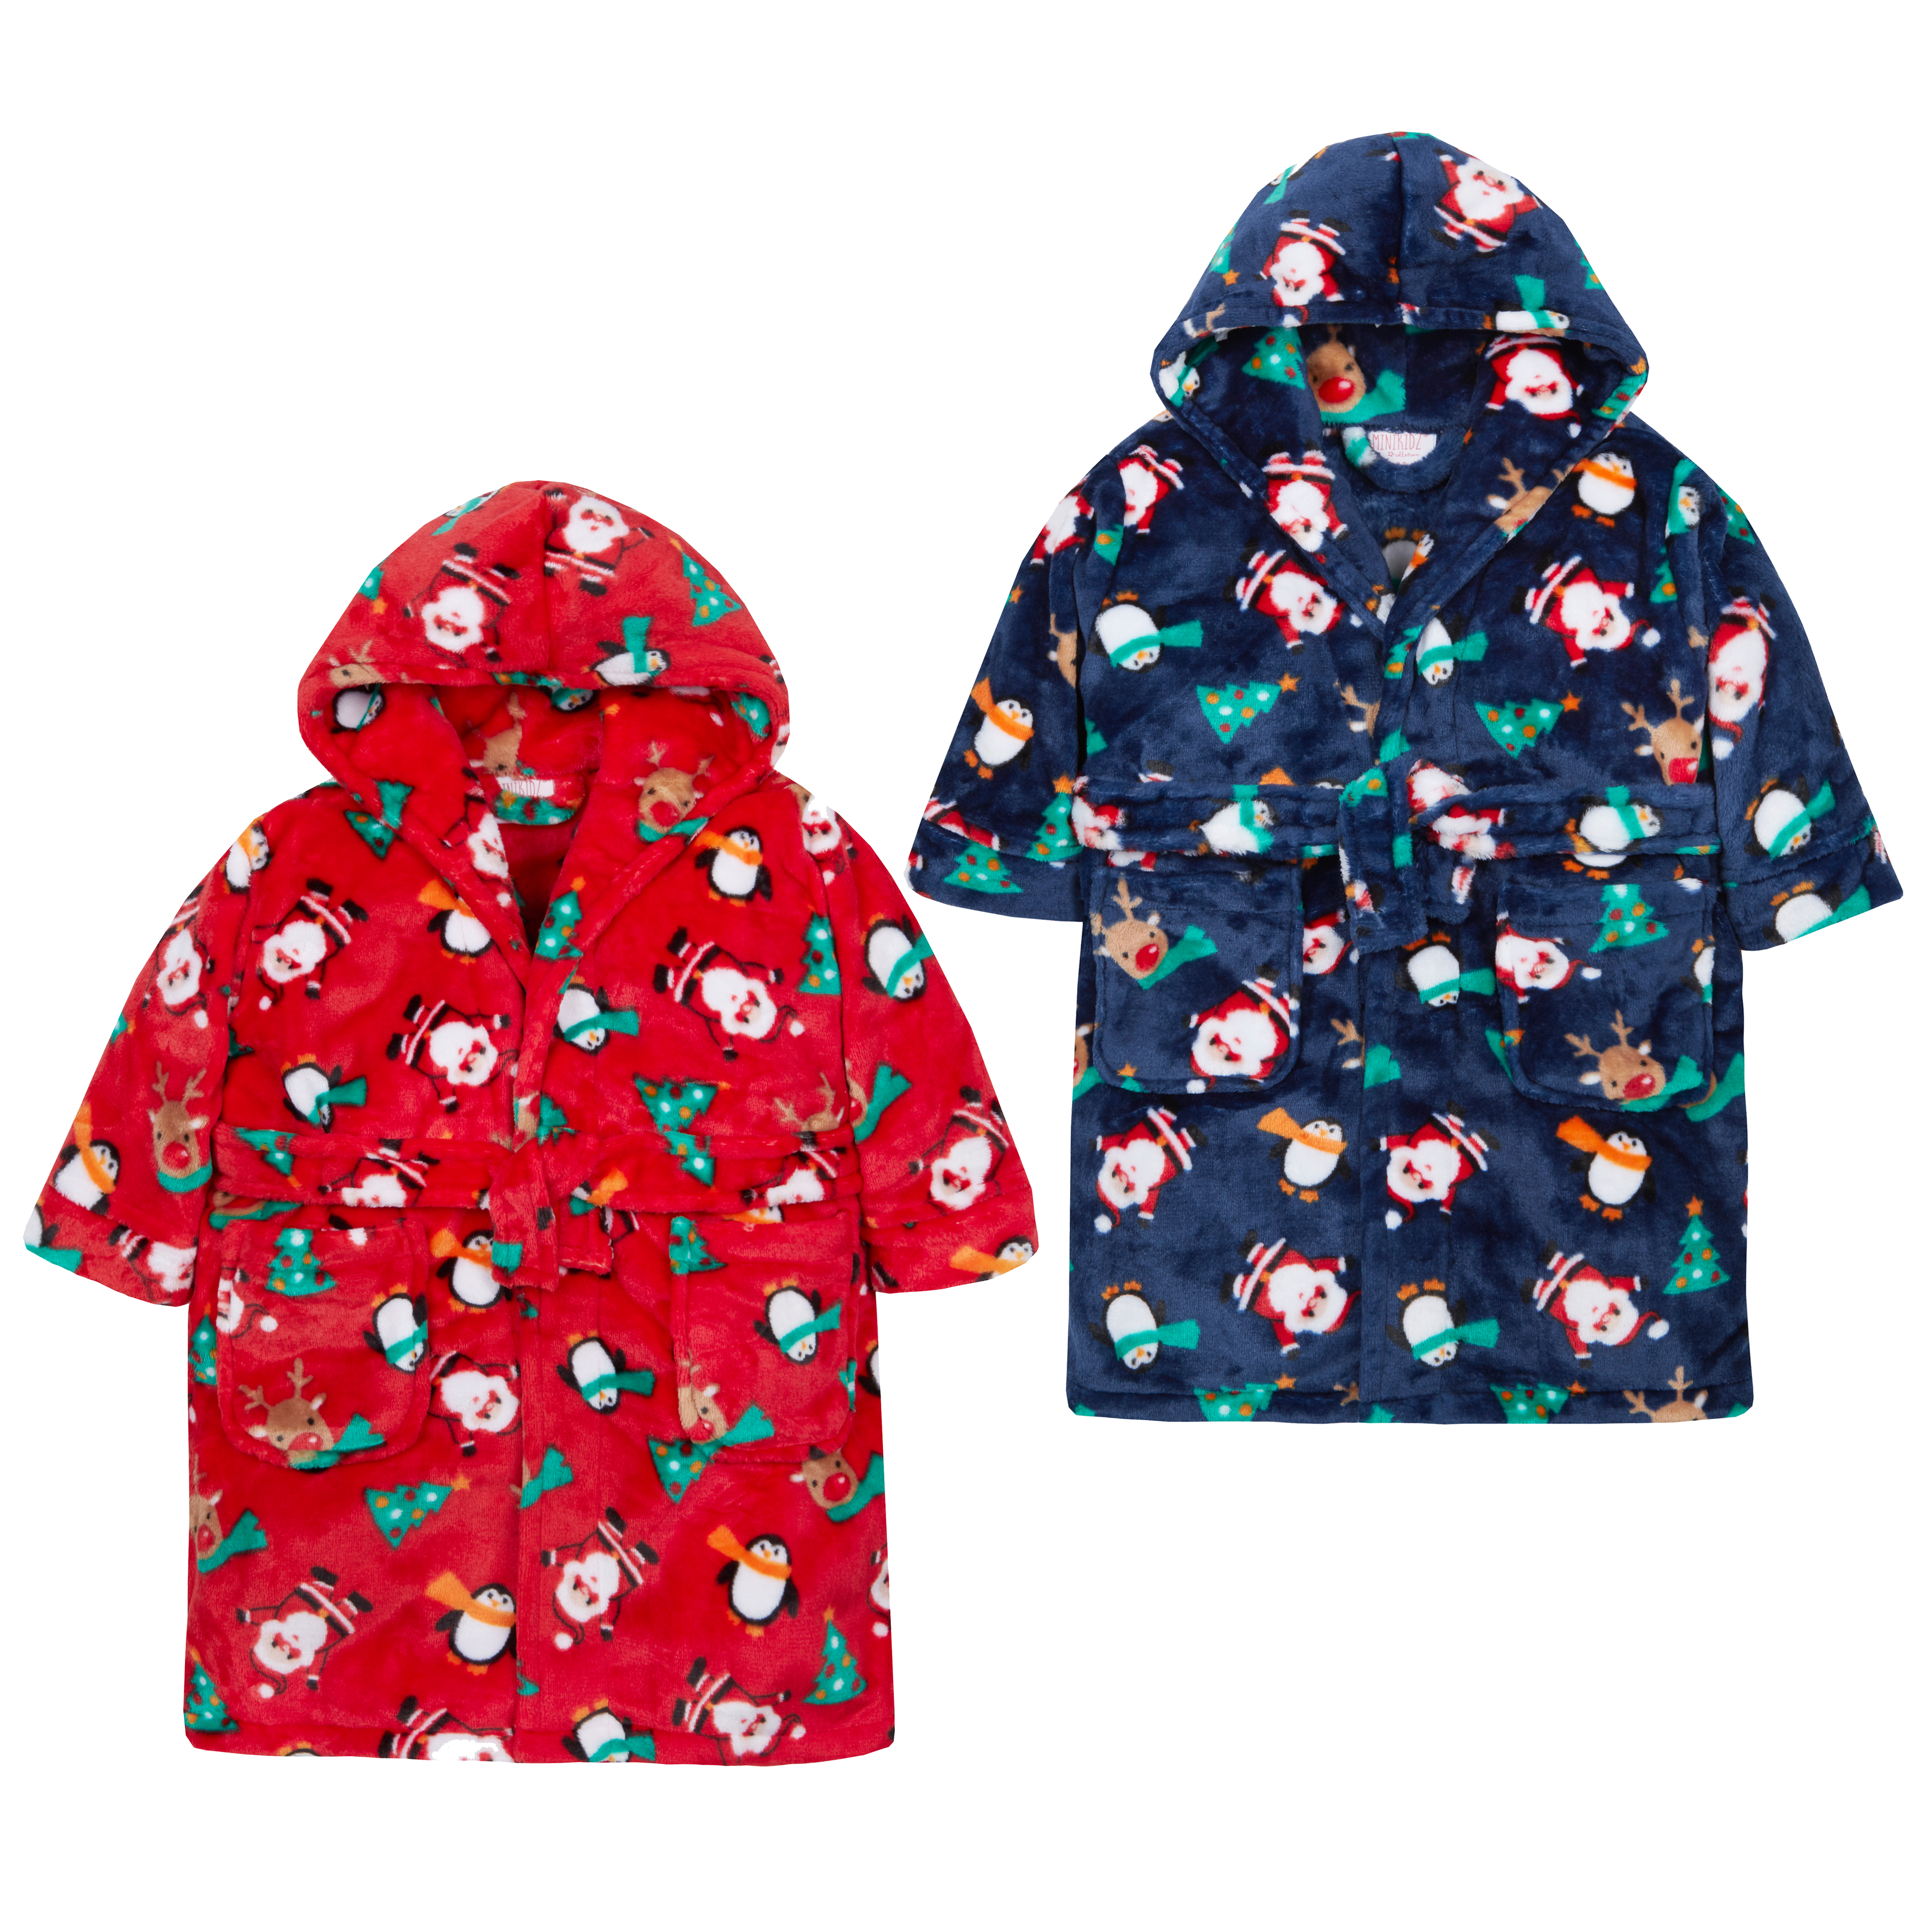 SALE Kids UNISEX Christmas Super Soft Fleece Dressing Gown Ages 2-13 Years NEW